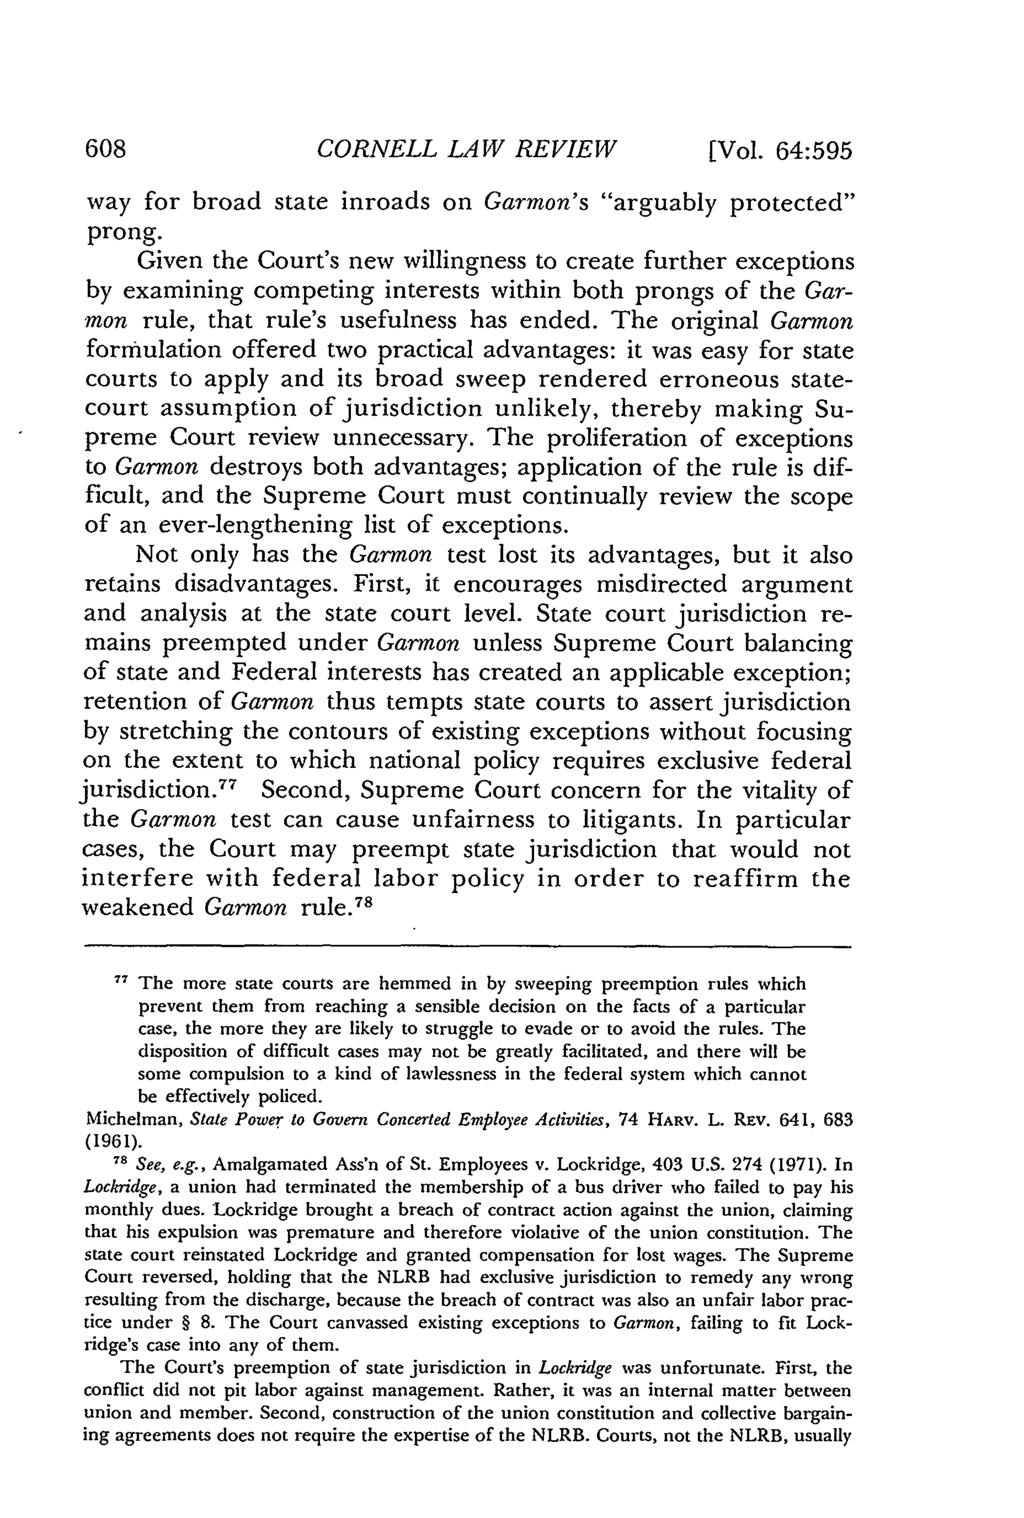 608 CORNELL LAW REVIEW [Vol. 64:595 way for broad state inroads on Garmon's "arguably protected" prong.